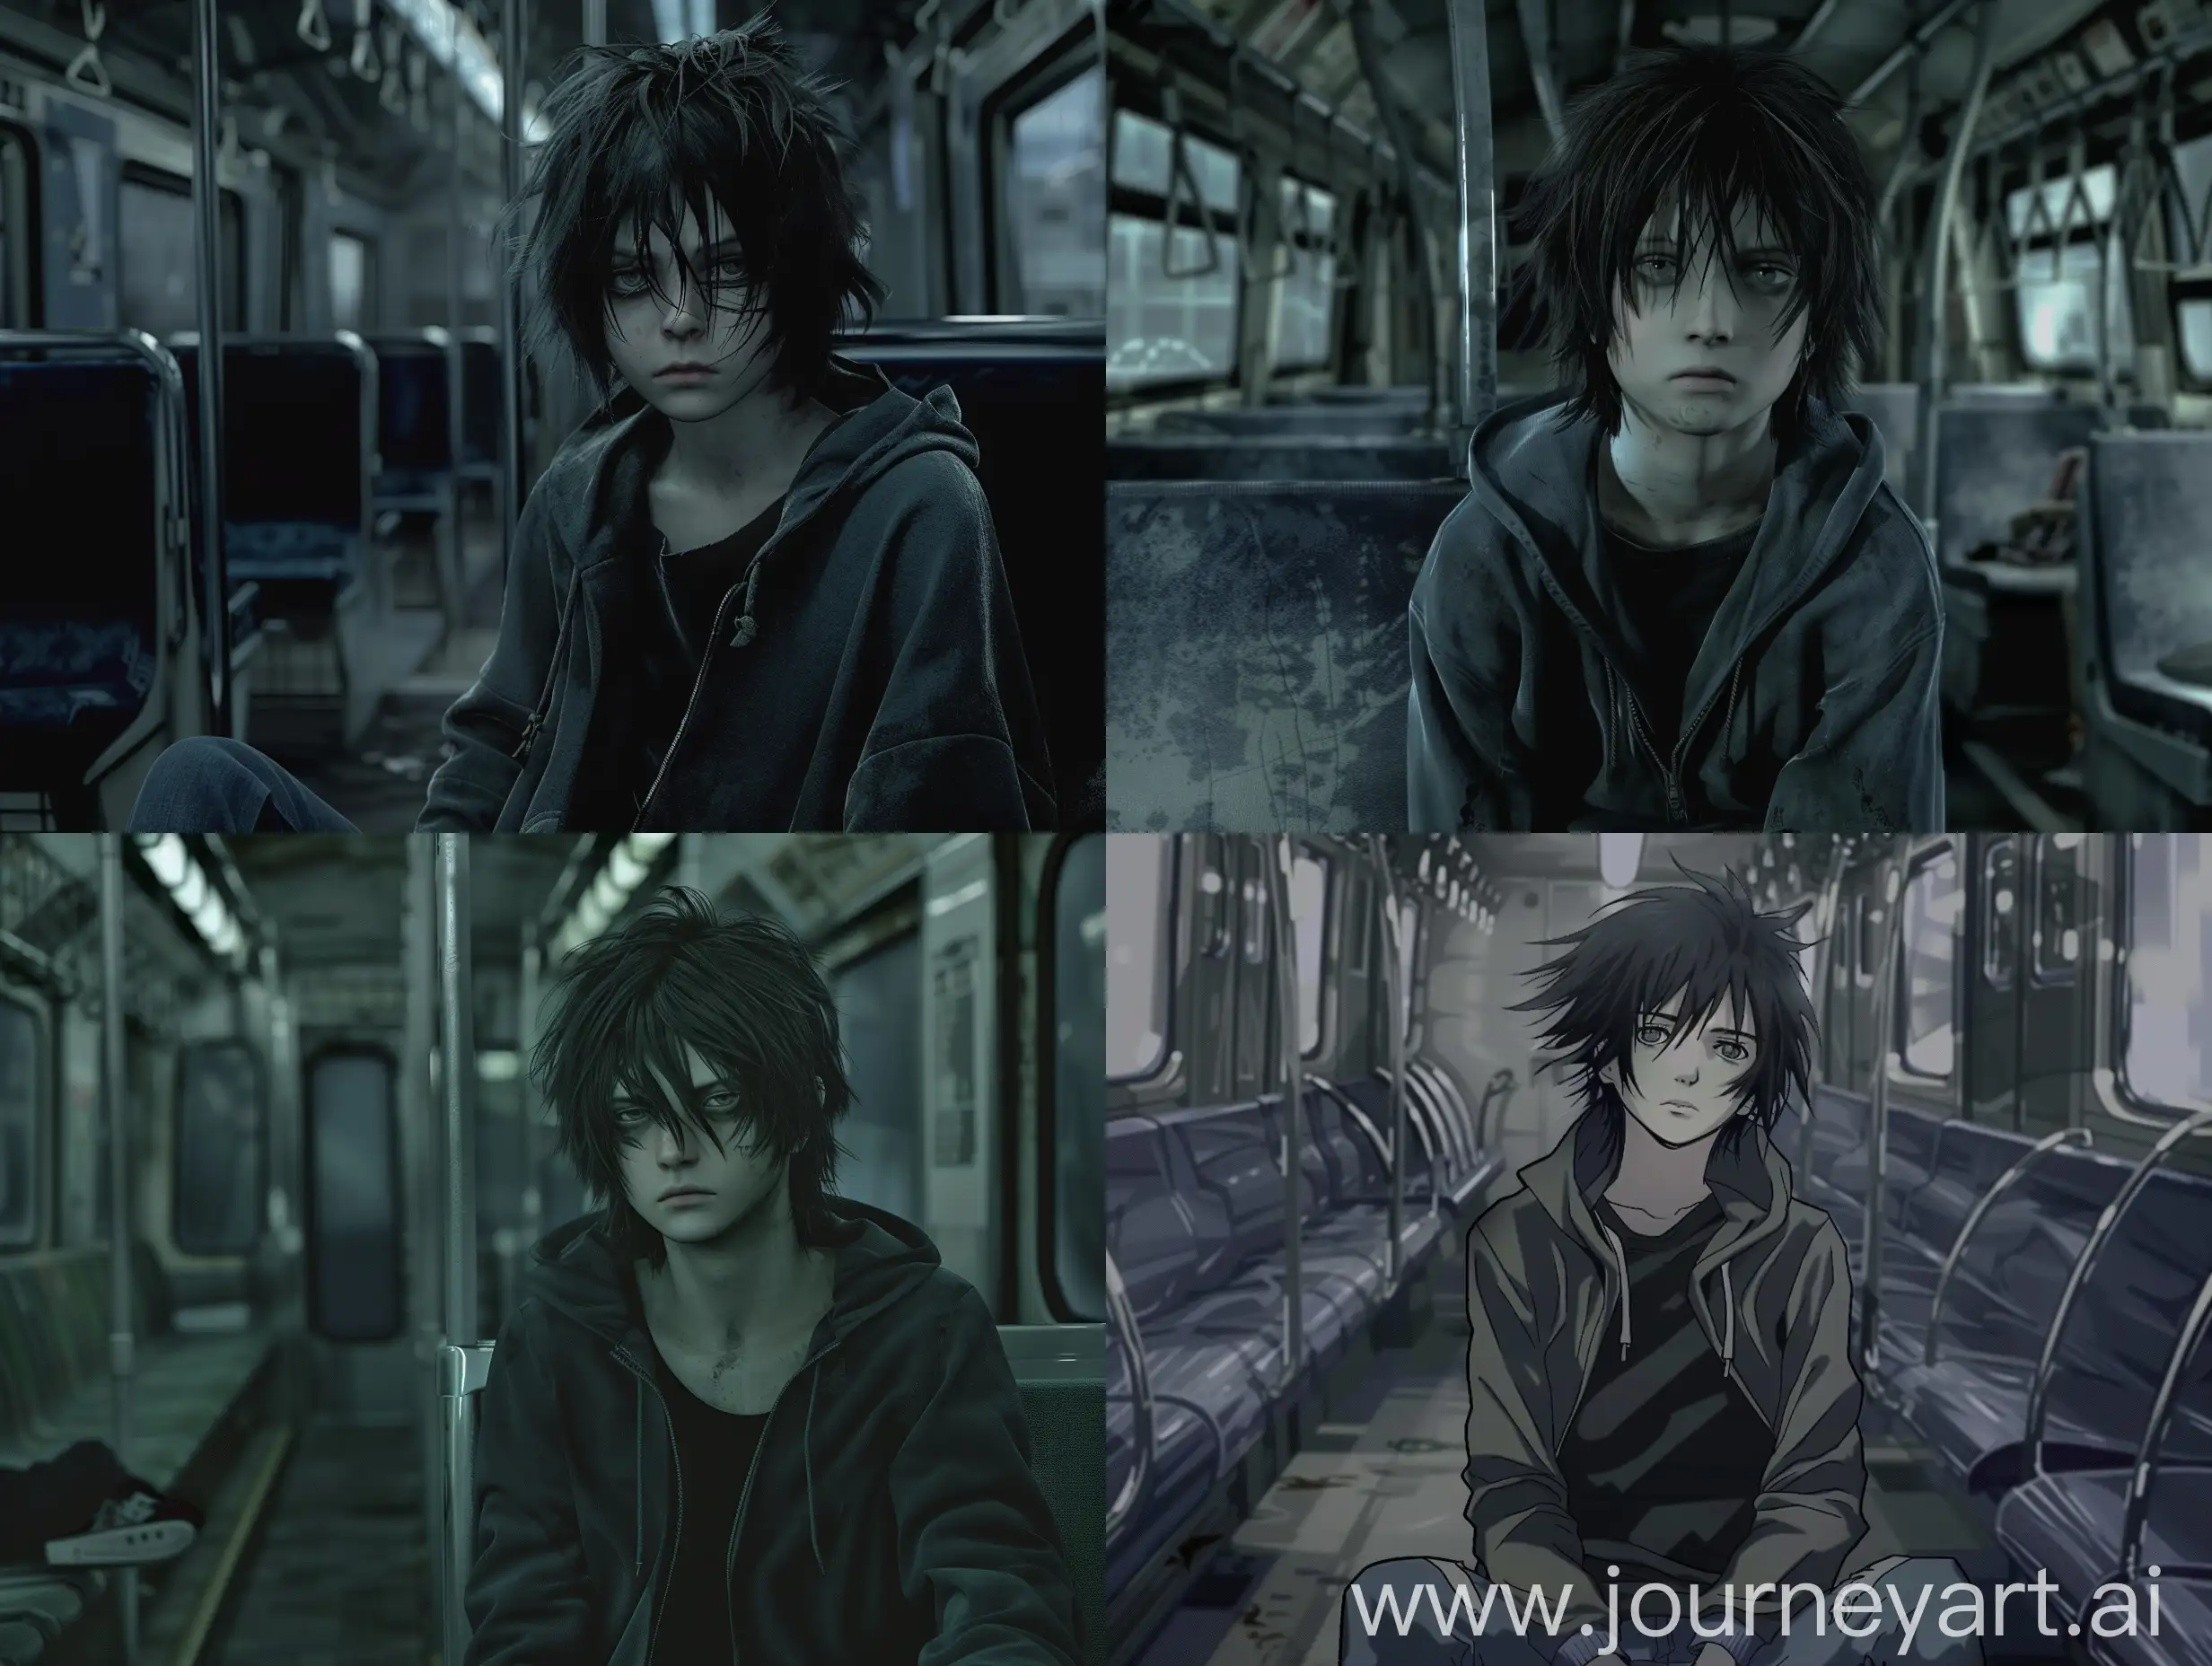 Ps2 silent hill 2 game screenshot, 17 year old boy with dark messy medium length hair(almost reach shoulders), grey eyes, Bangs that cover one eye, depressive expression, dark grey unzipped hoodie with black tshirt under it, pale skin, black converses, dark blue jeans, thin body type, a but feminine body, sitting in empty abandoned train of metro. Dark. Very like PlayStation 2 Silent hill 2 screenshot, bad and unrealistic lighting, blurry textures, low poly